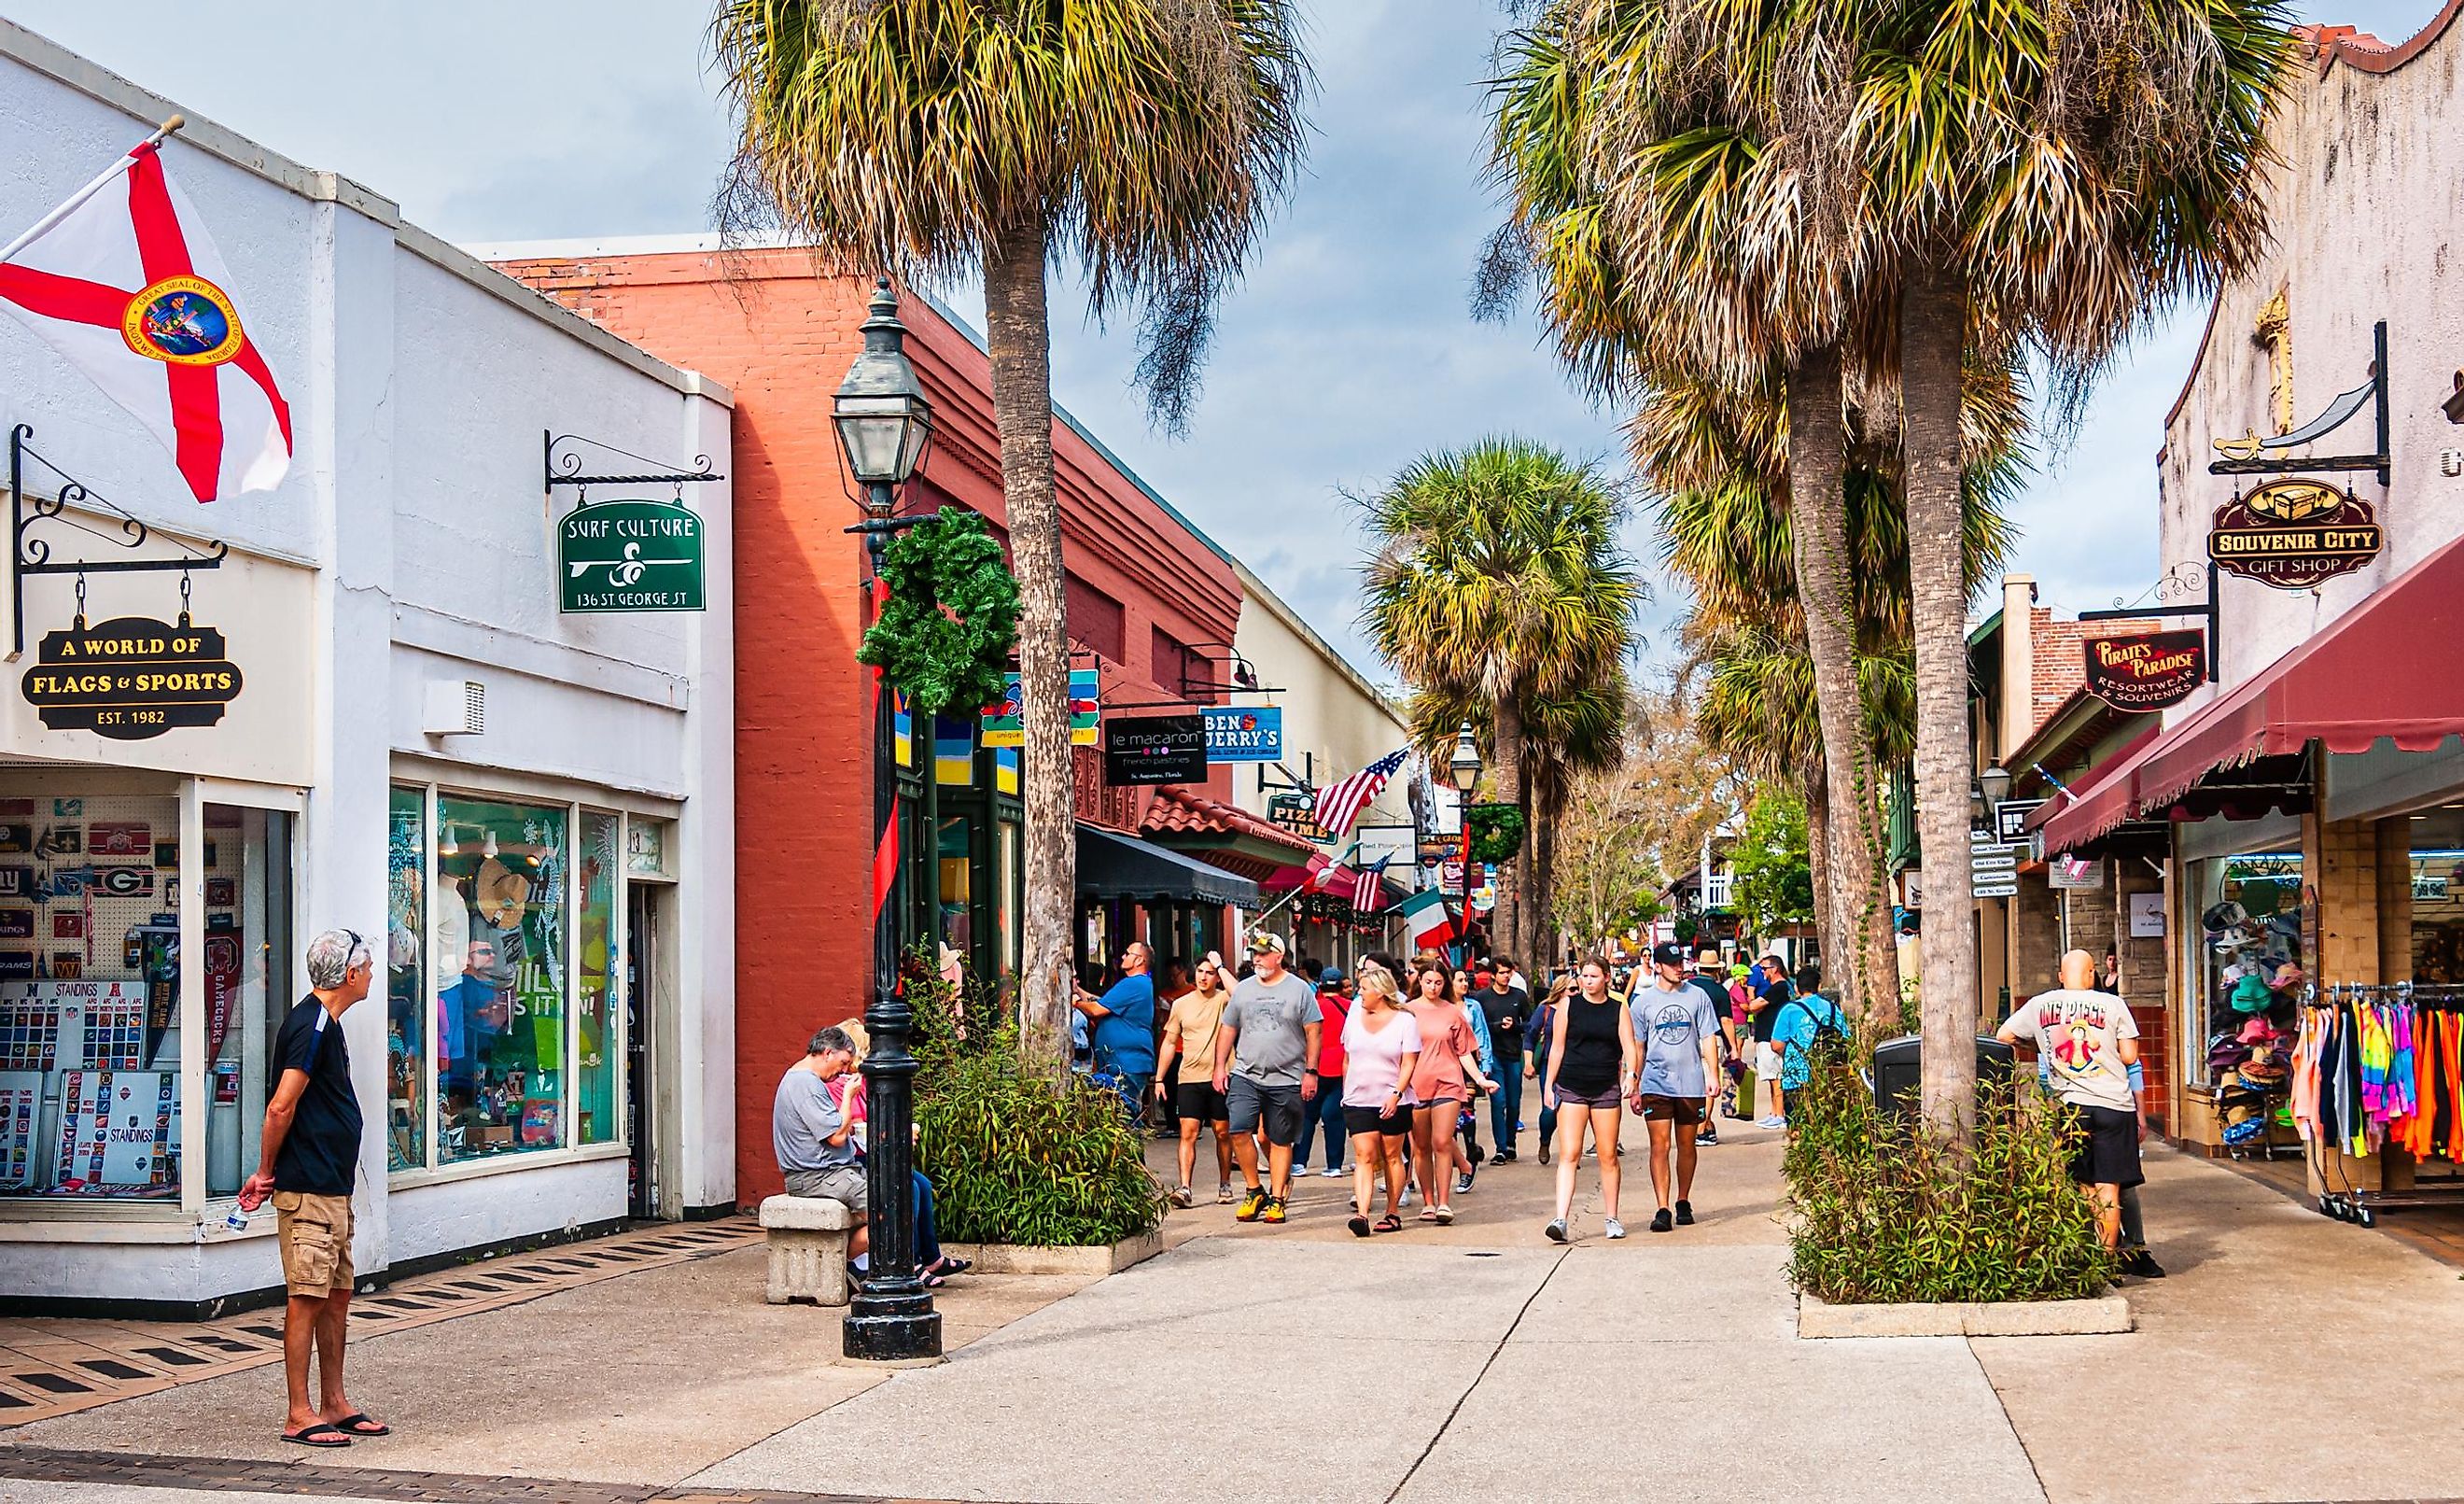  Large groups of visitors and tourists explore the array of shops near the end of Saint George street in Saint Augustine, Florida on an early January afternoon.